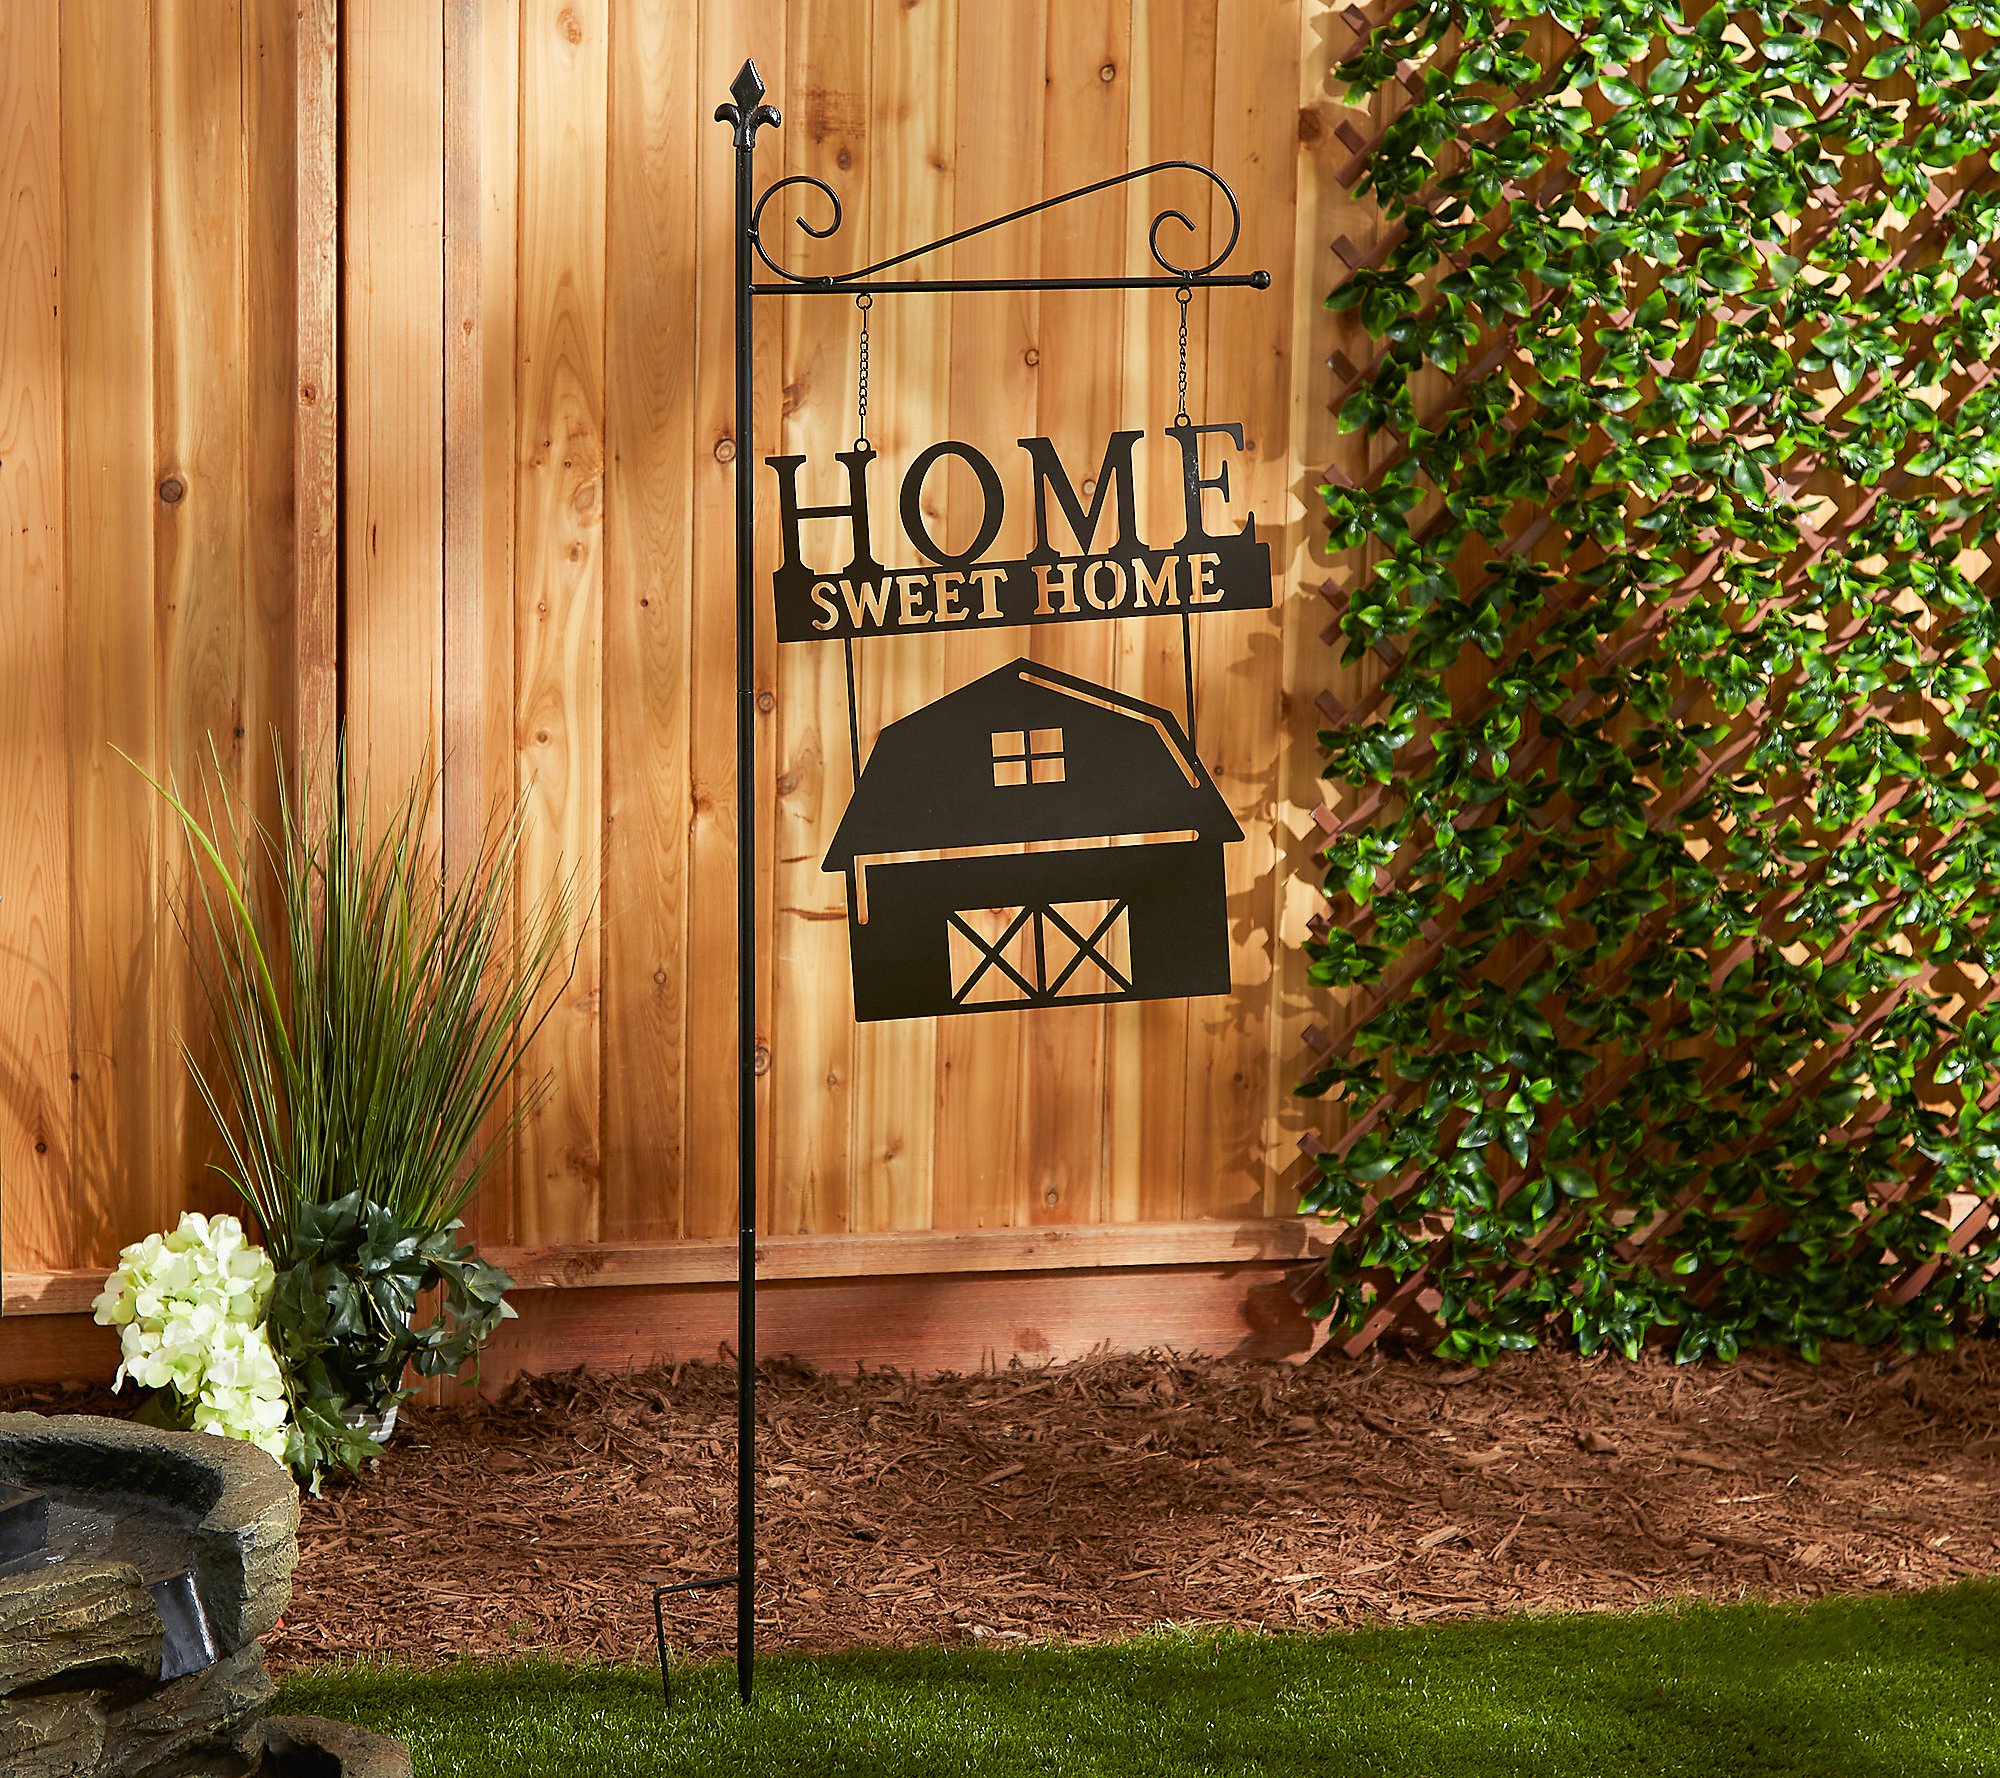 Design Imports Home Sweet Home Barn Garden Stake